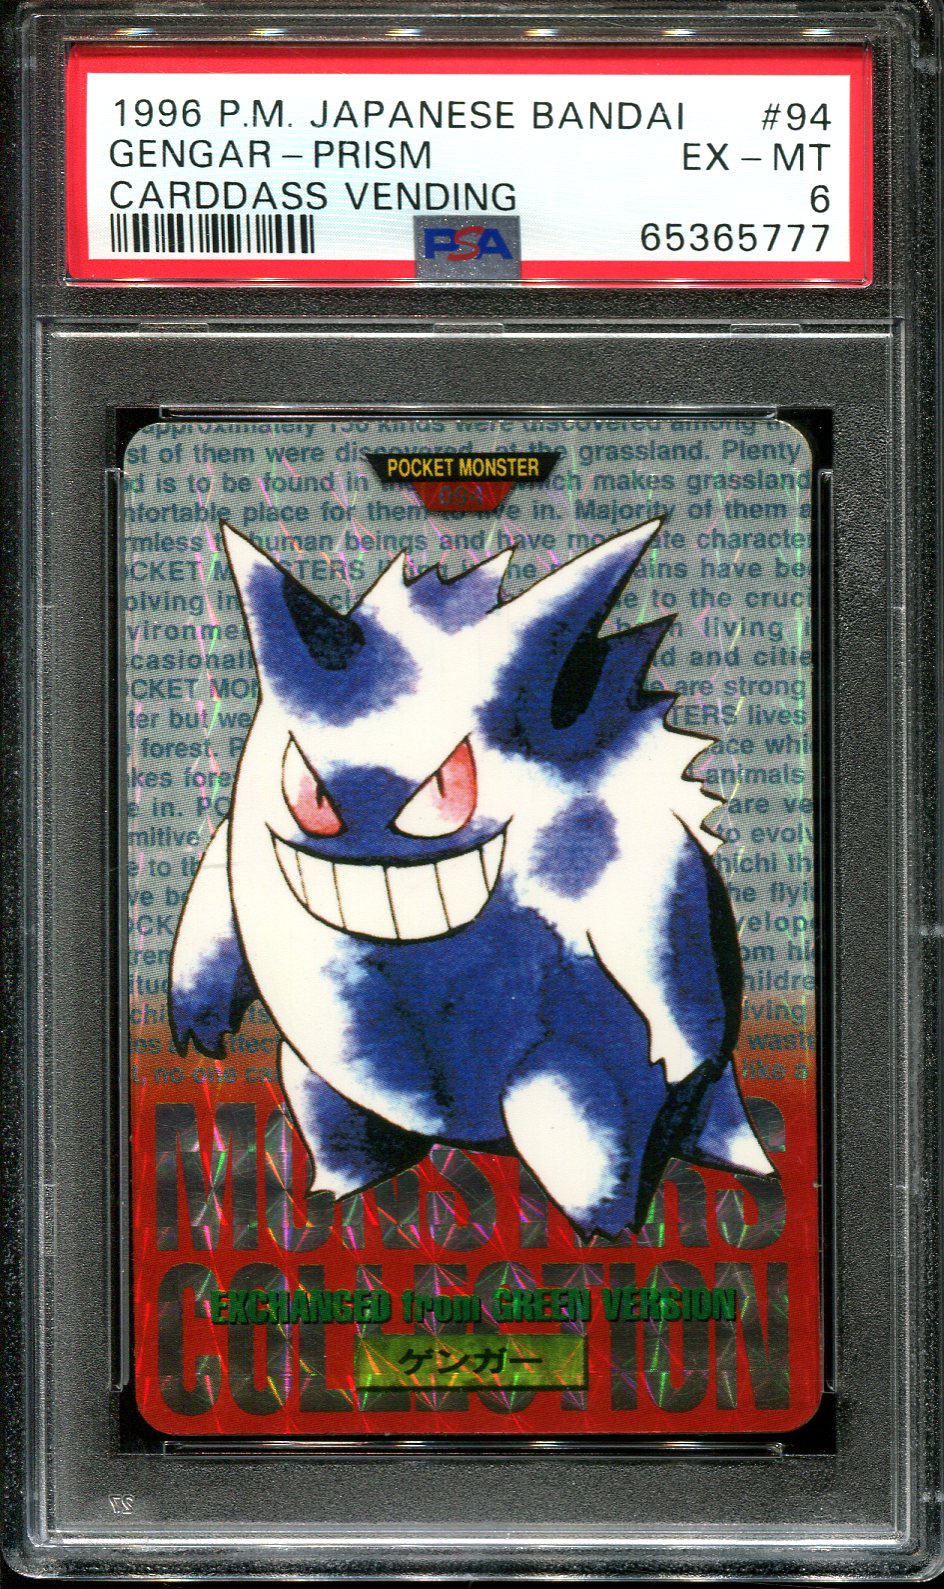 GENGAR 094 PSA 6 POKEMON CARDDASS VENDING RED MONSTERS COLLECTION JAPANESE HOLO